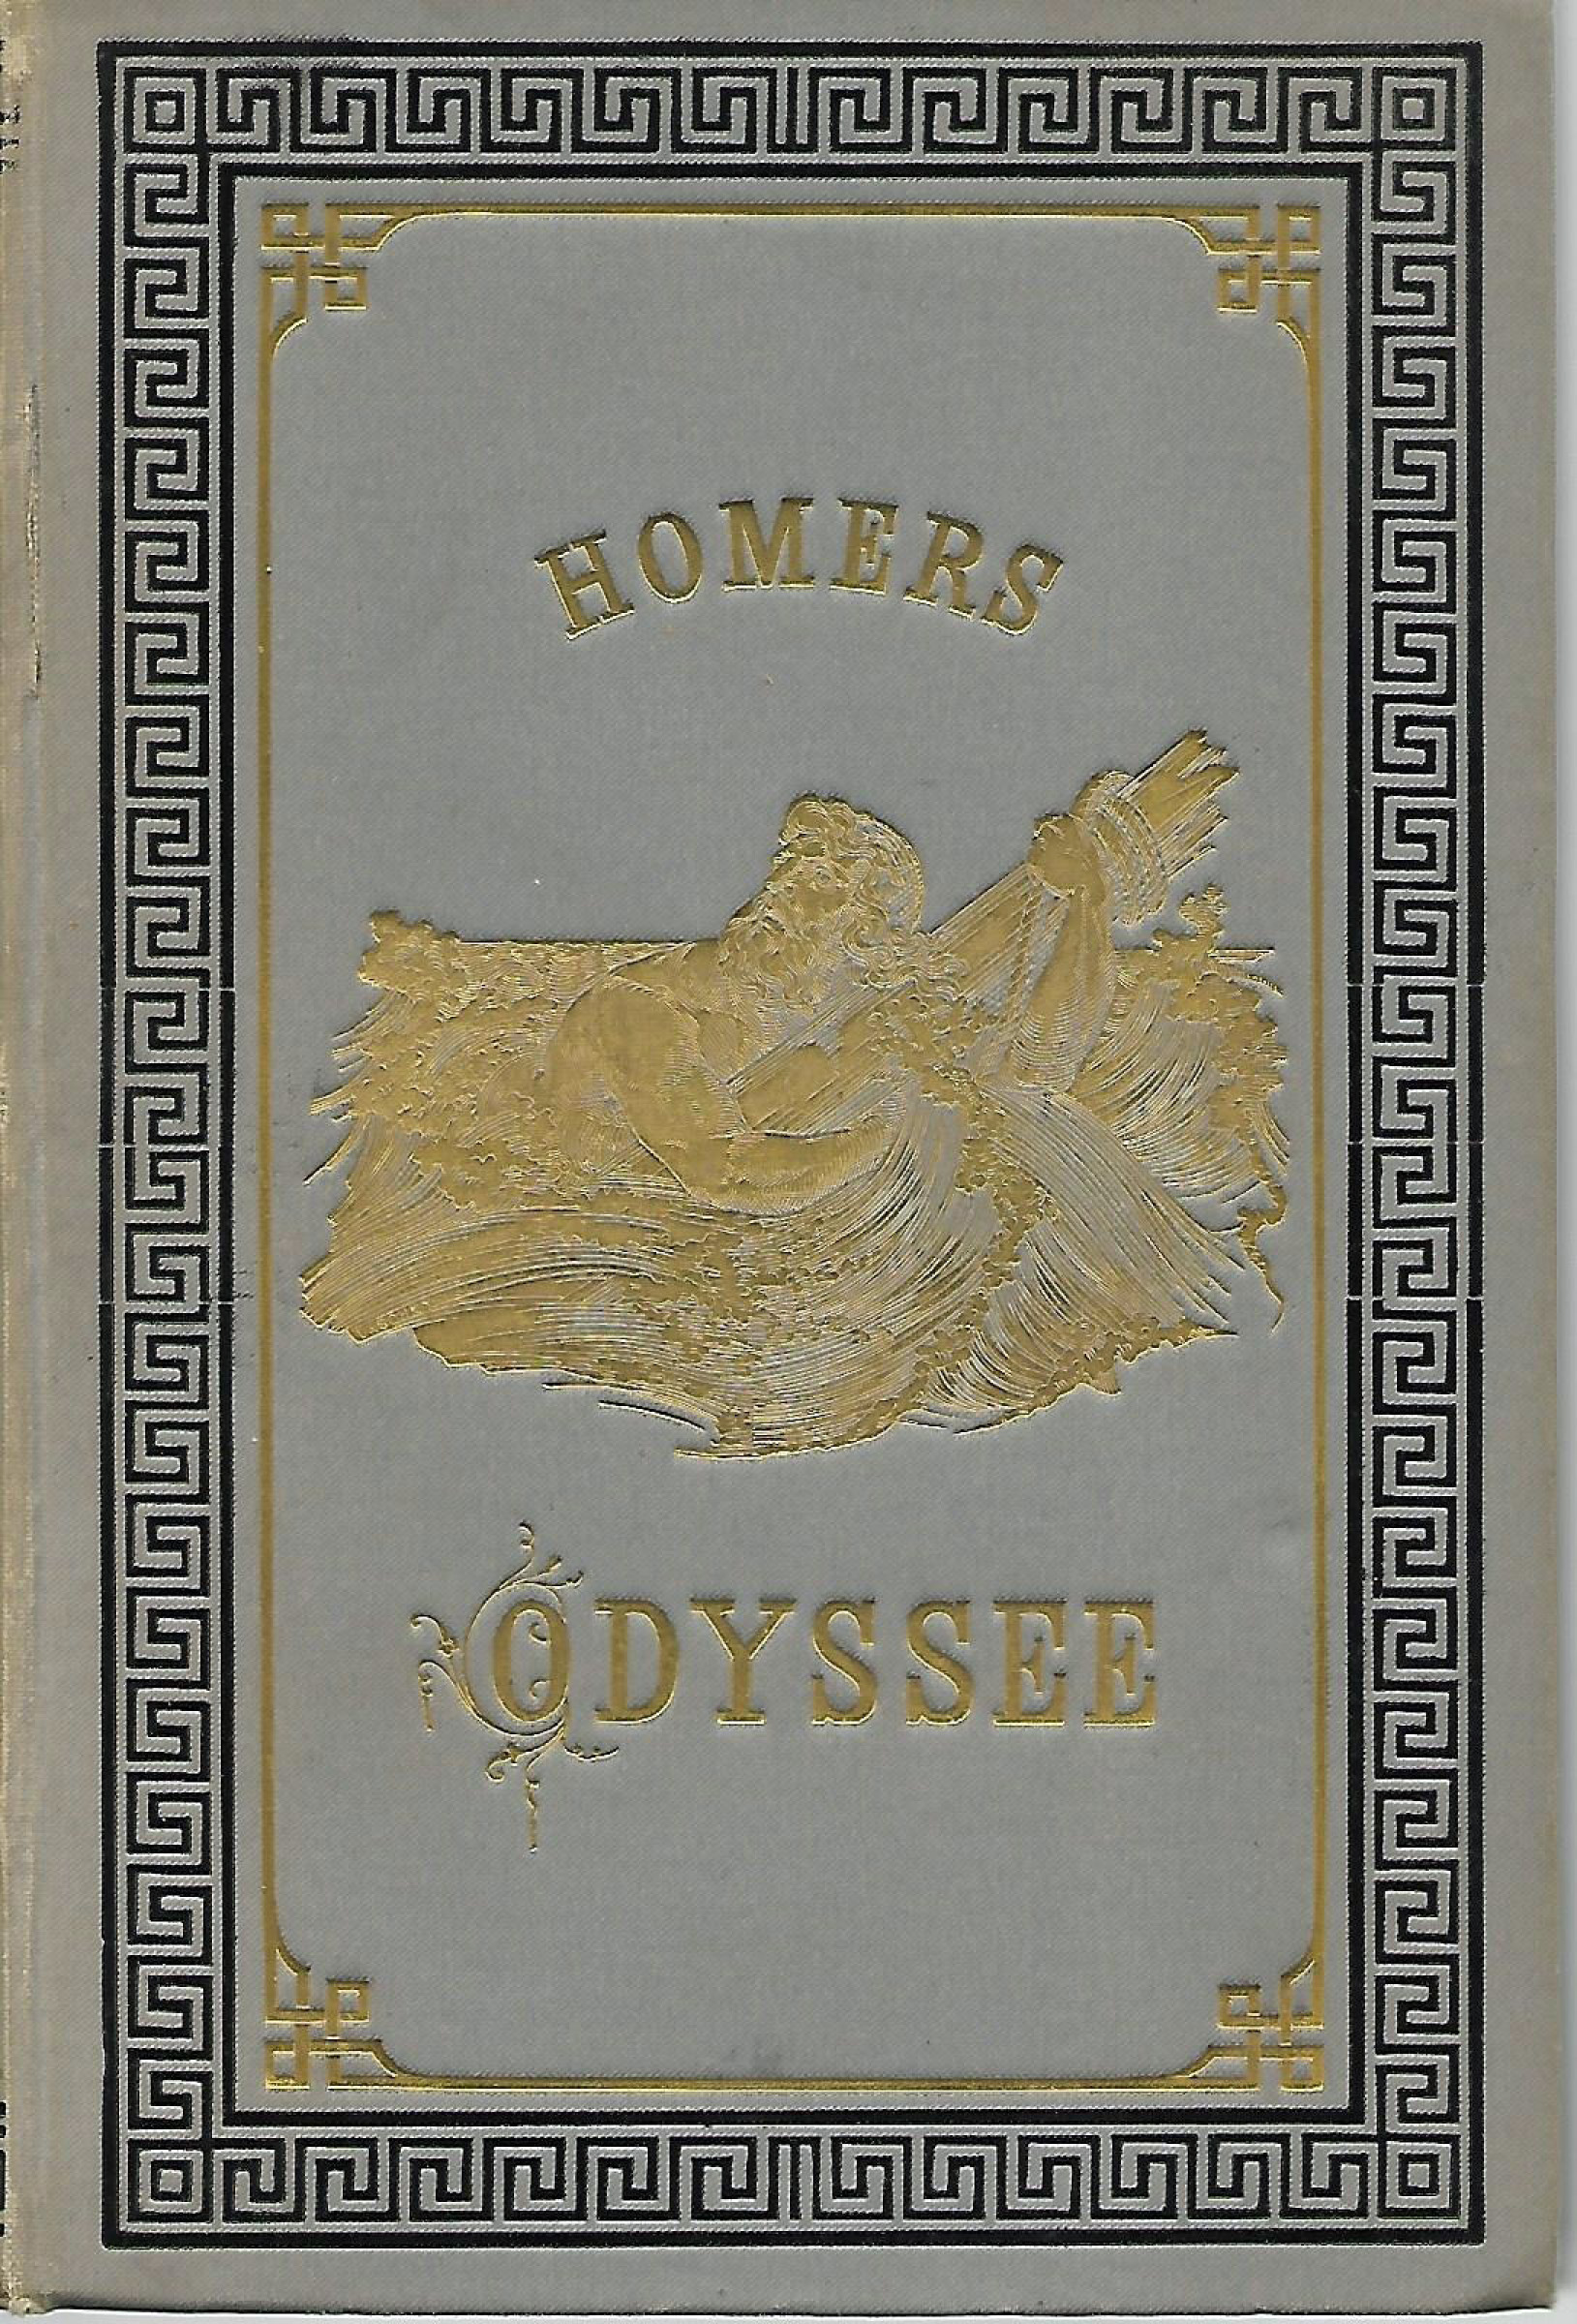 Homers Odyssee - Christian Wilster 1890-1